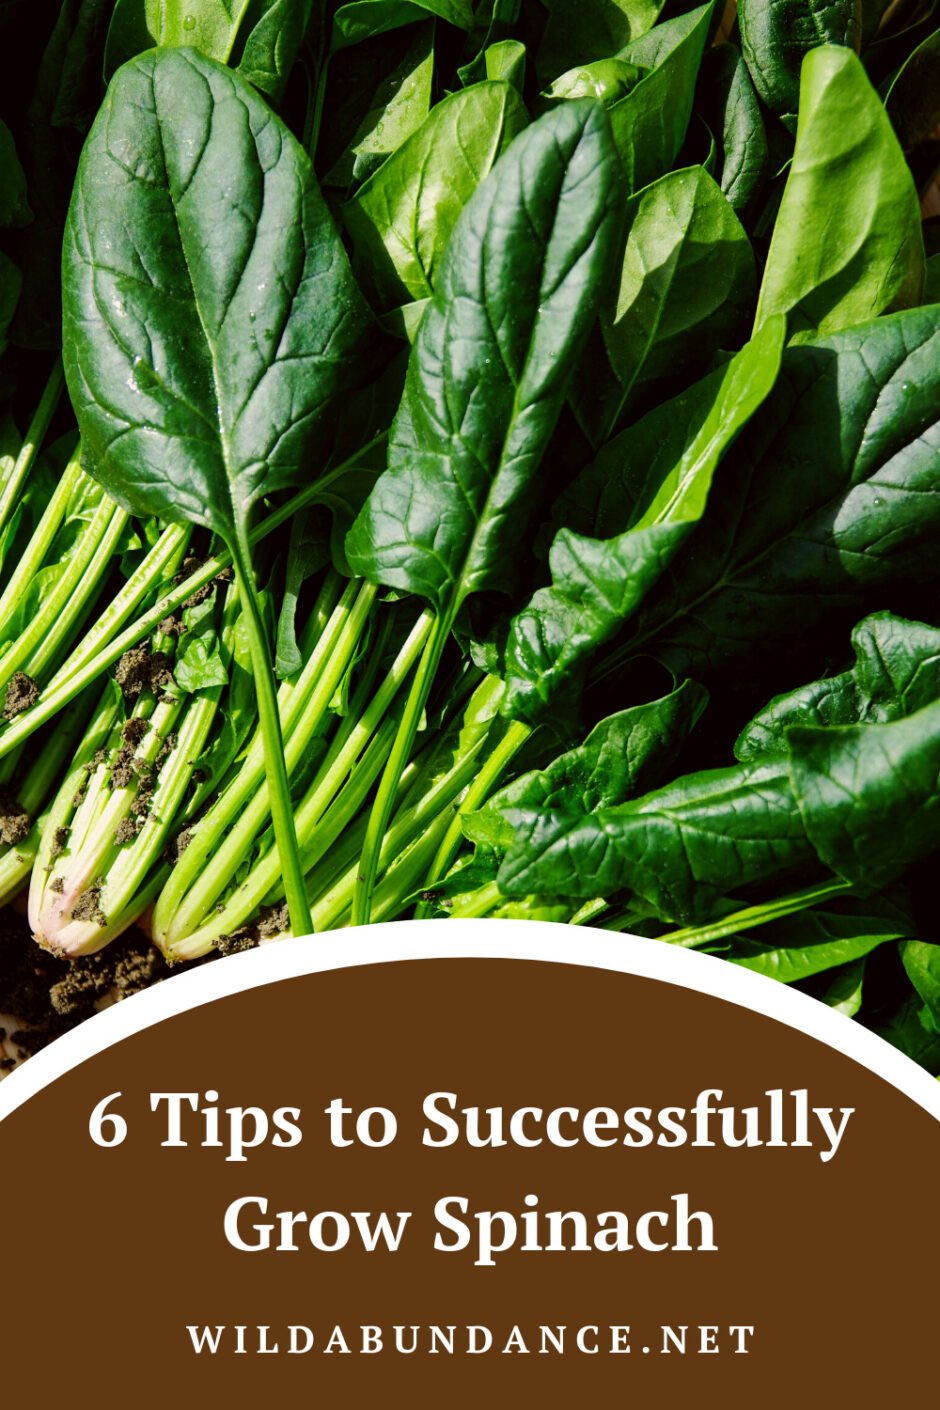 6 tips to successfully Grow Spinach